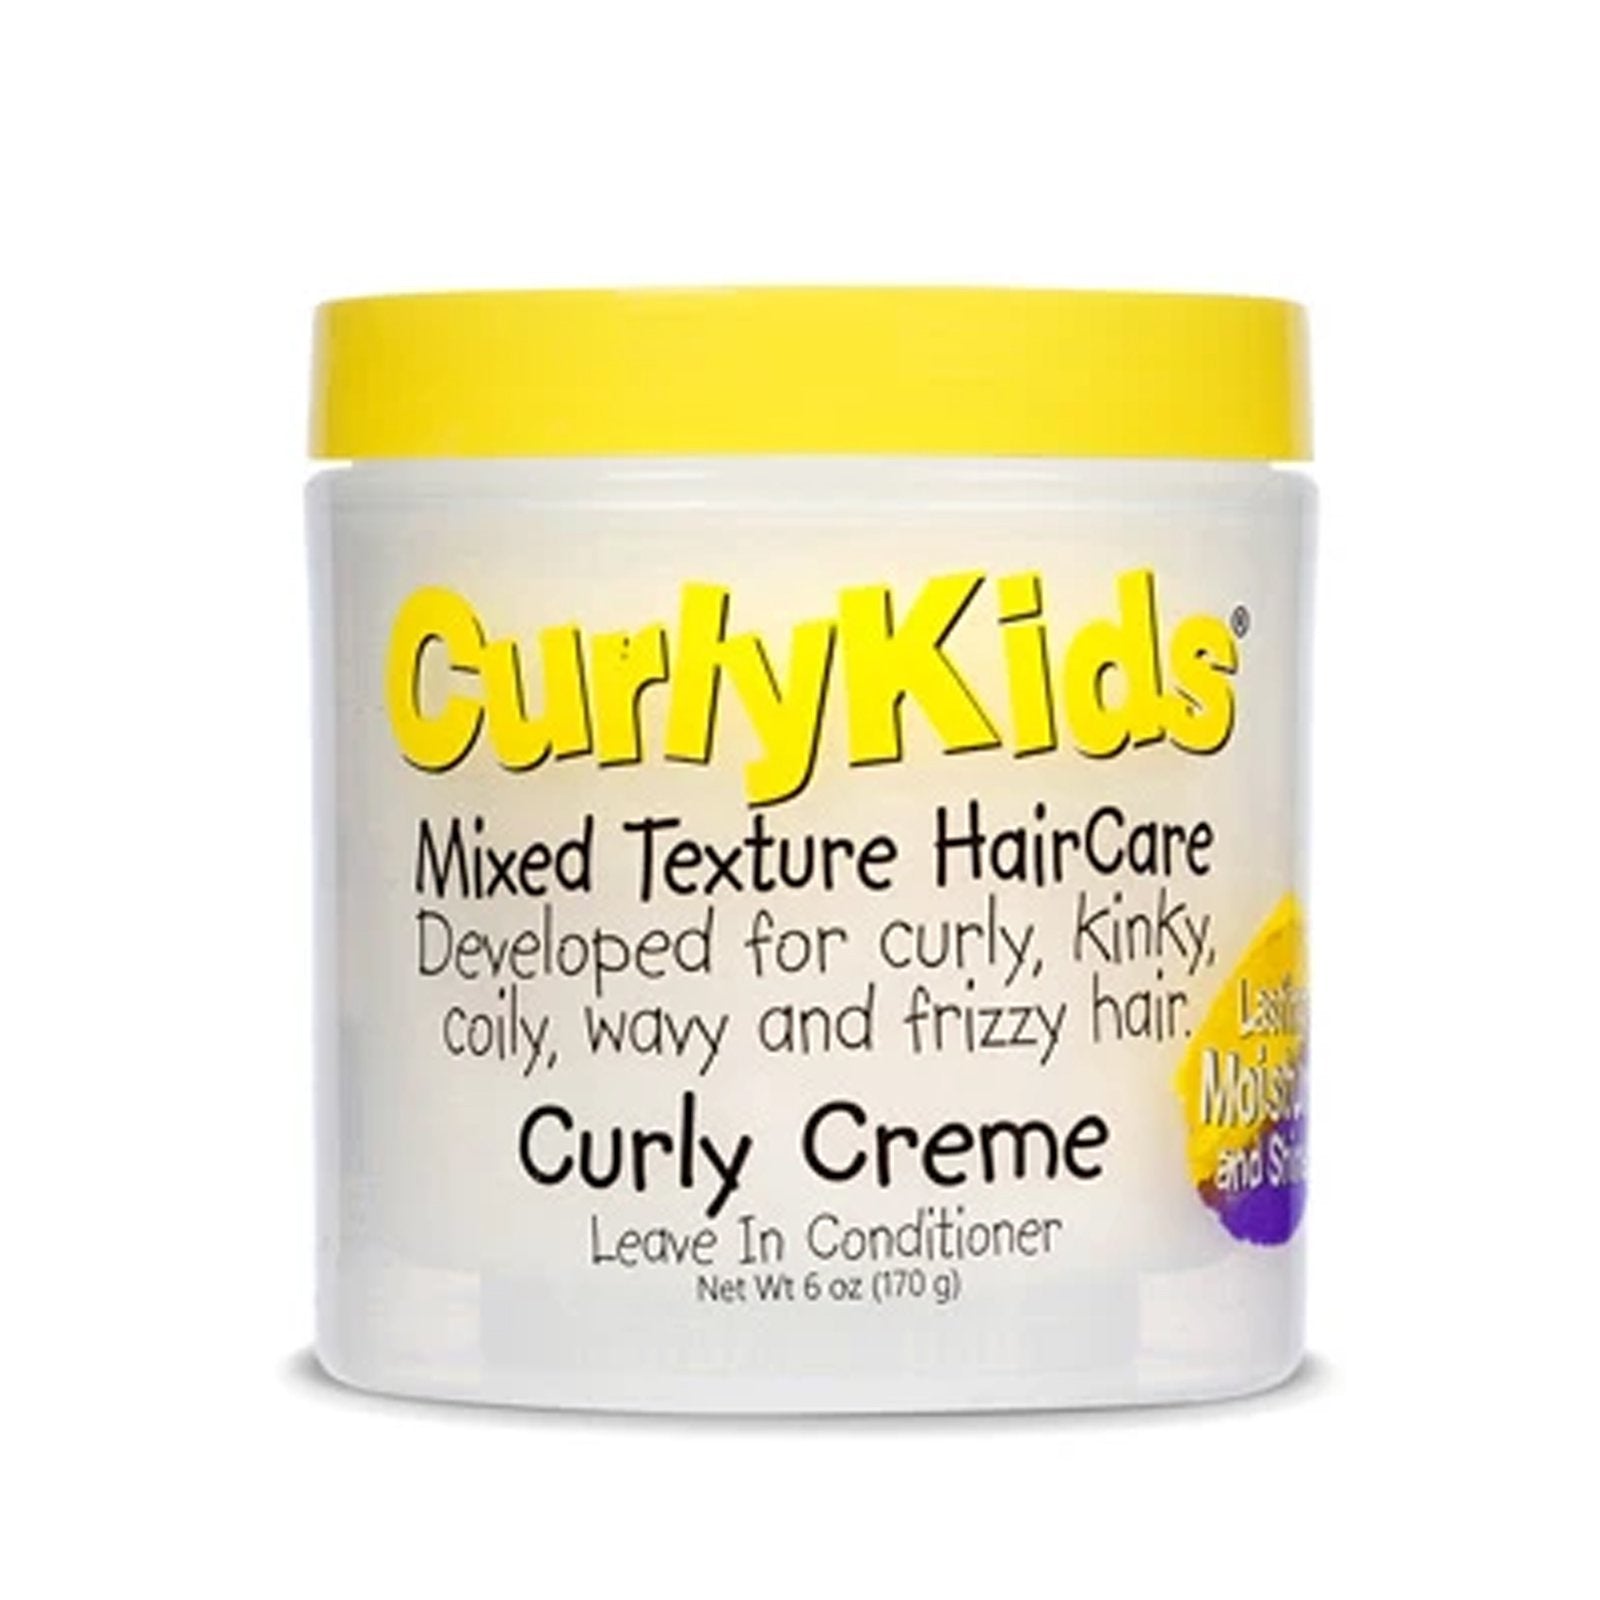 CurlyKids Curly Creme Conditioner Leave In Conditioner 6 oz- AQ Online 